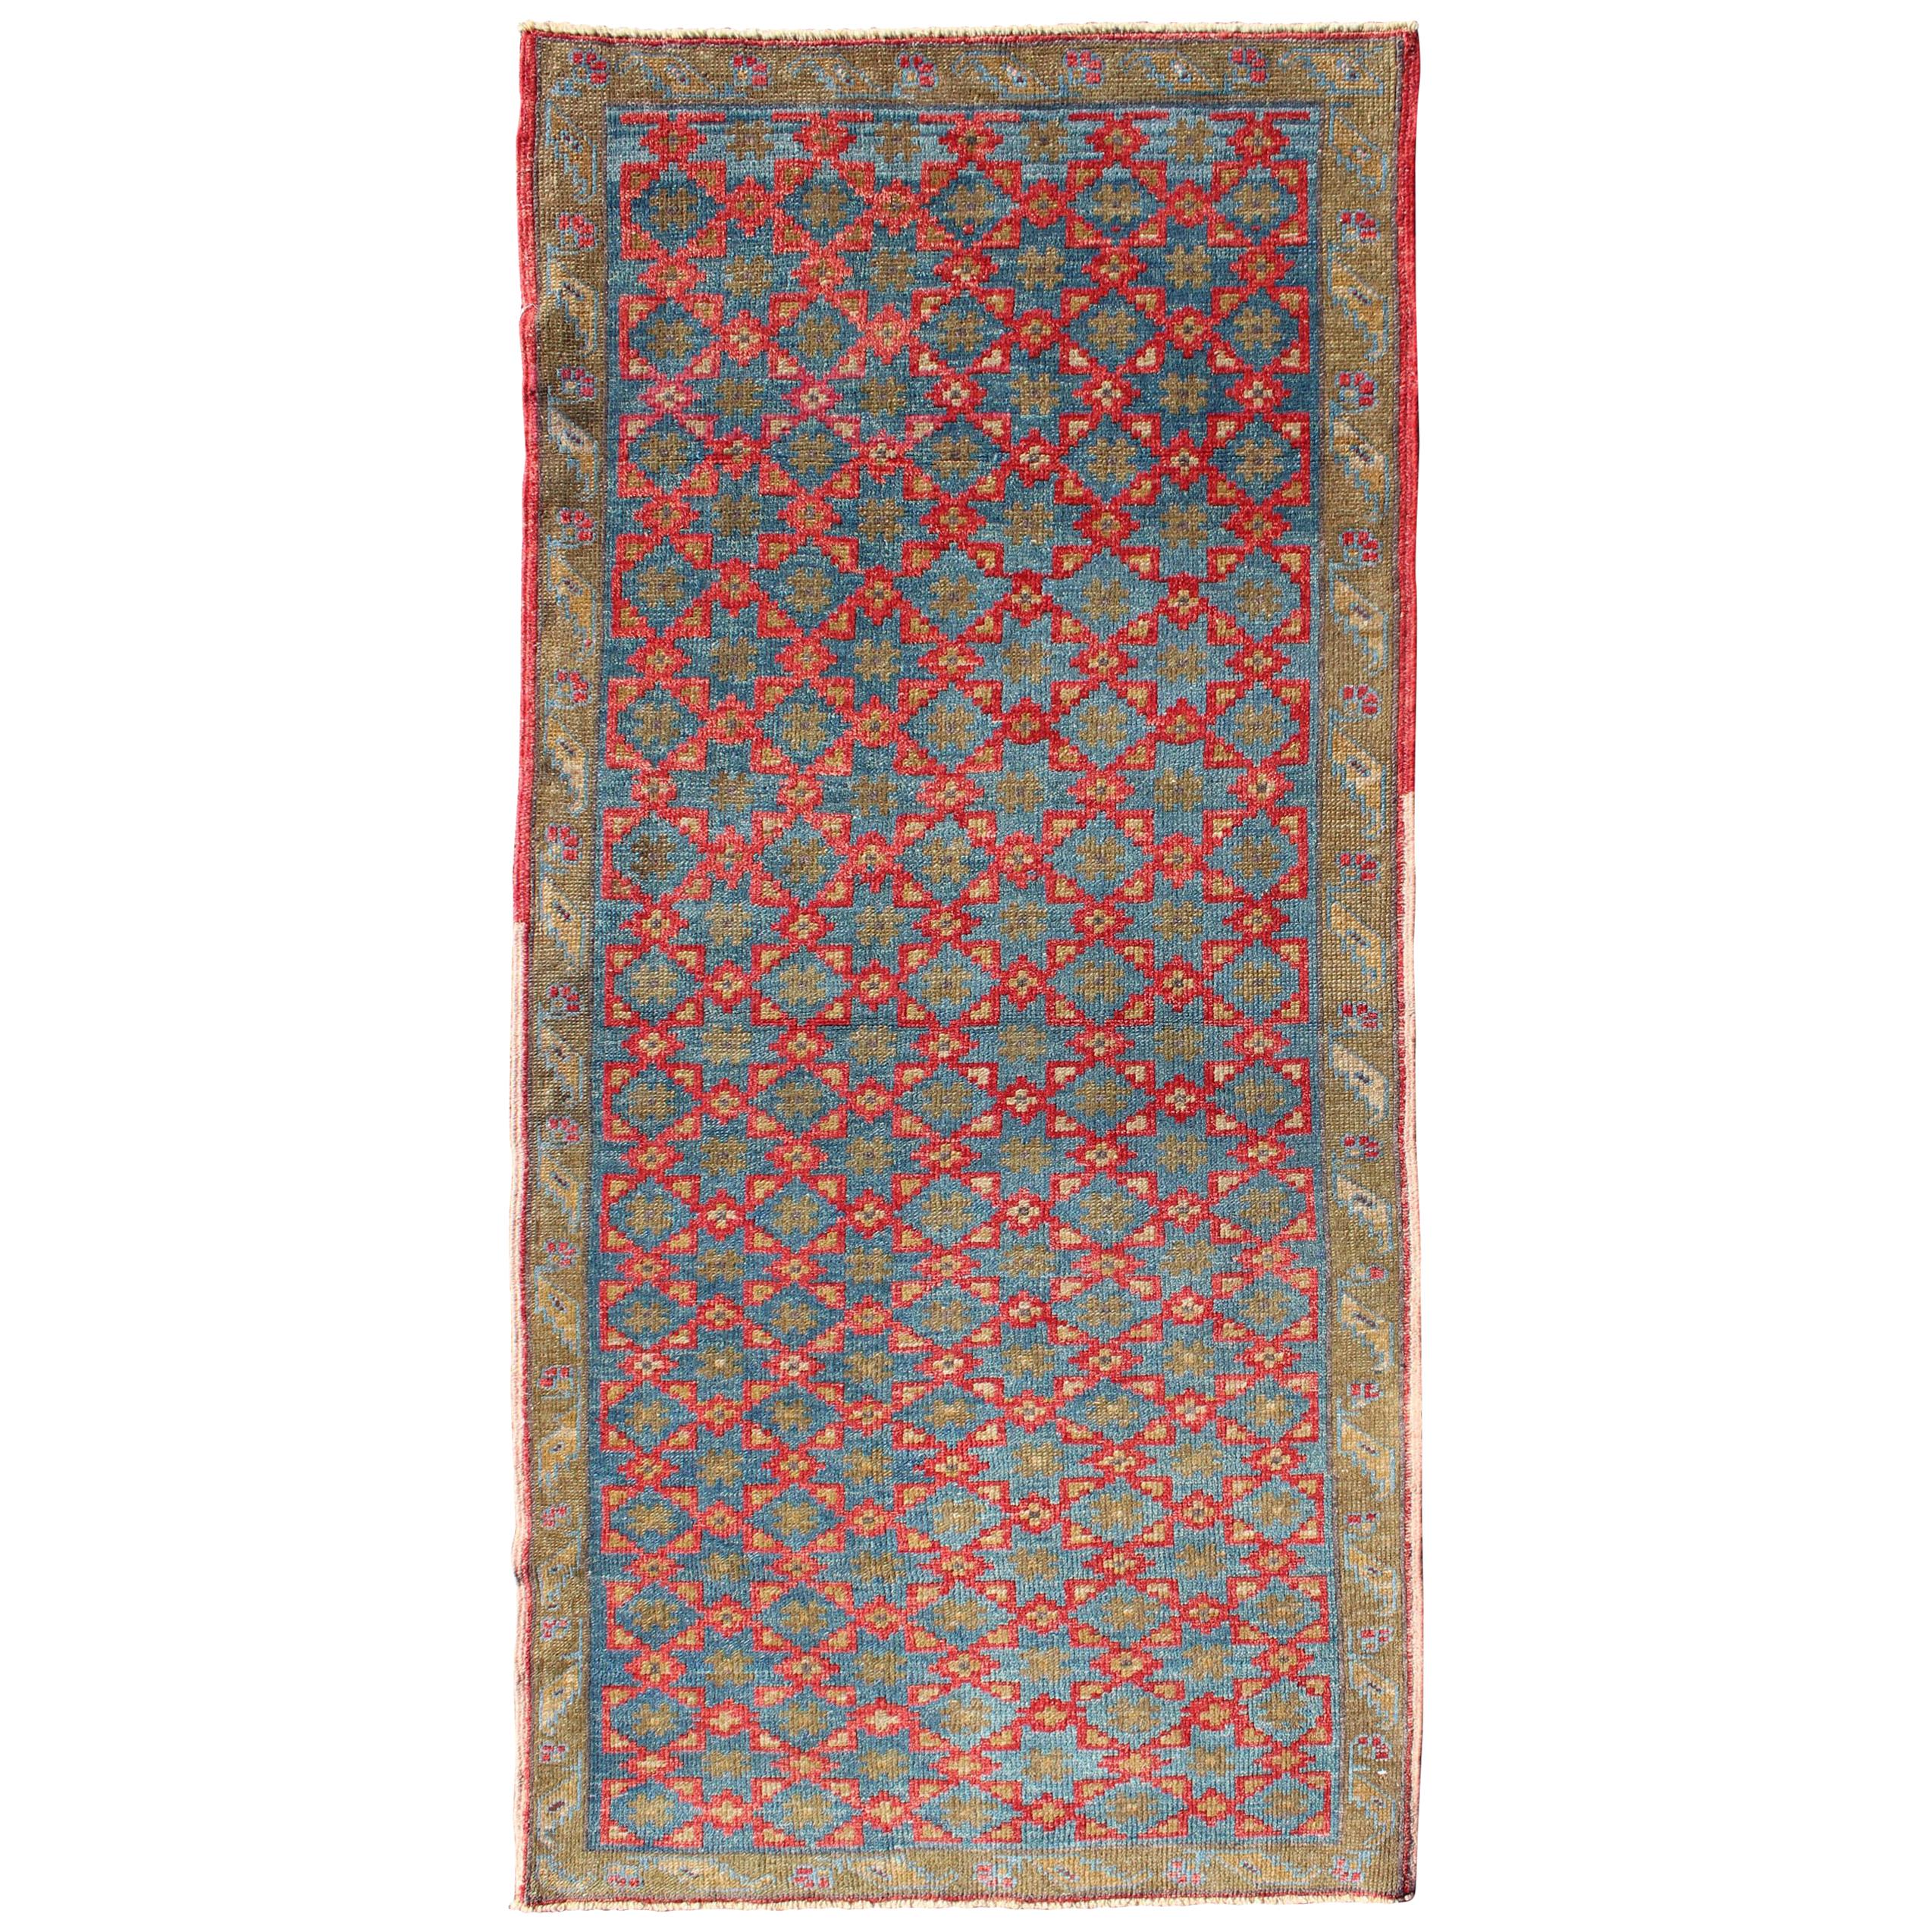 Turkish Konya Rug with All-Over Floral Lattice Design in Red, Blue, Olive Green For Sale